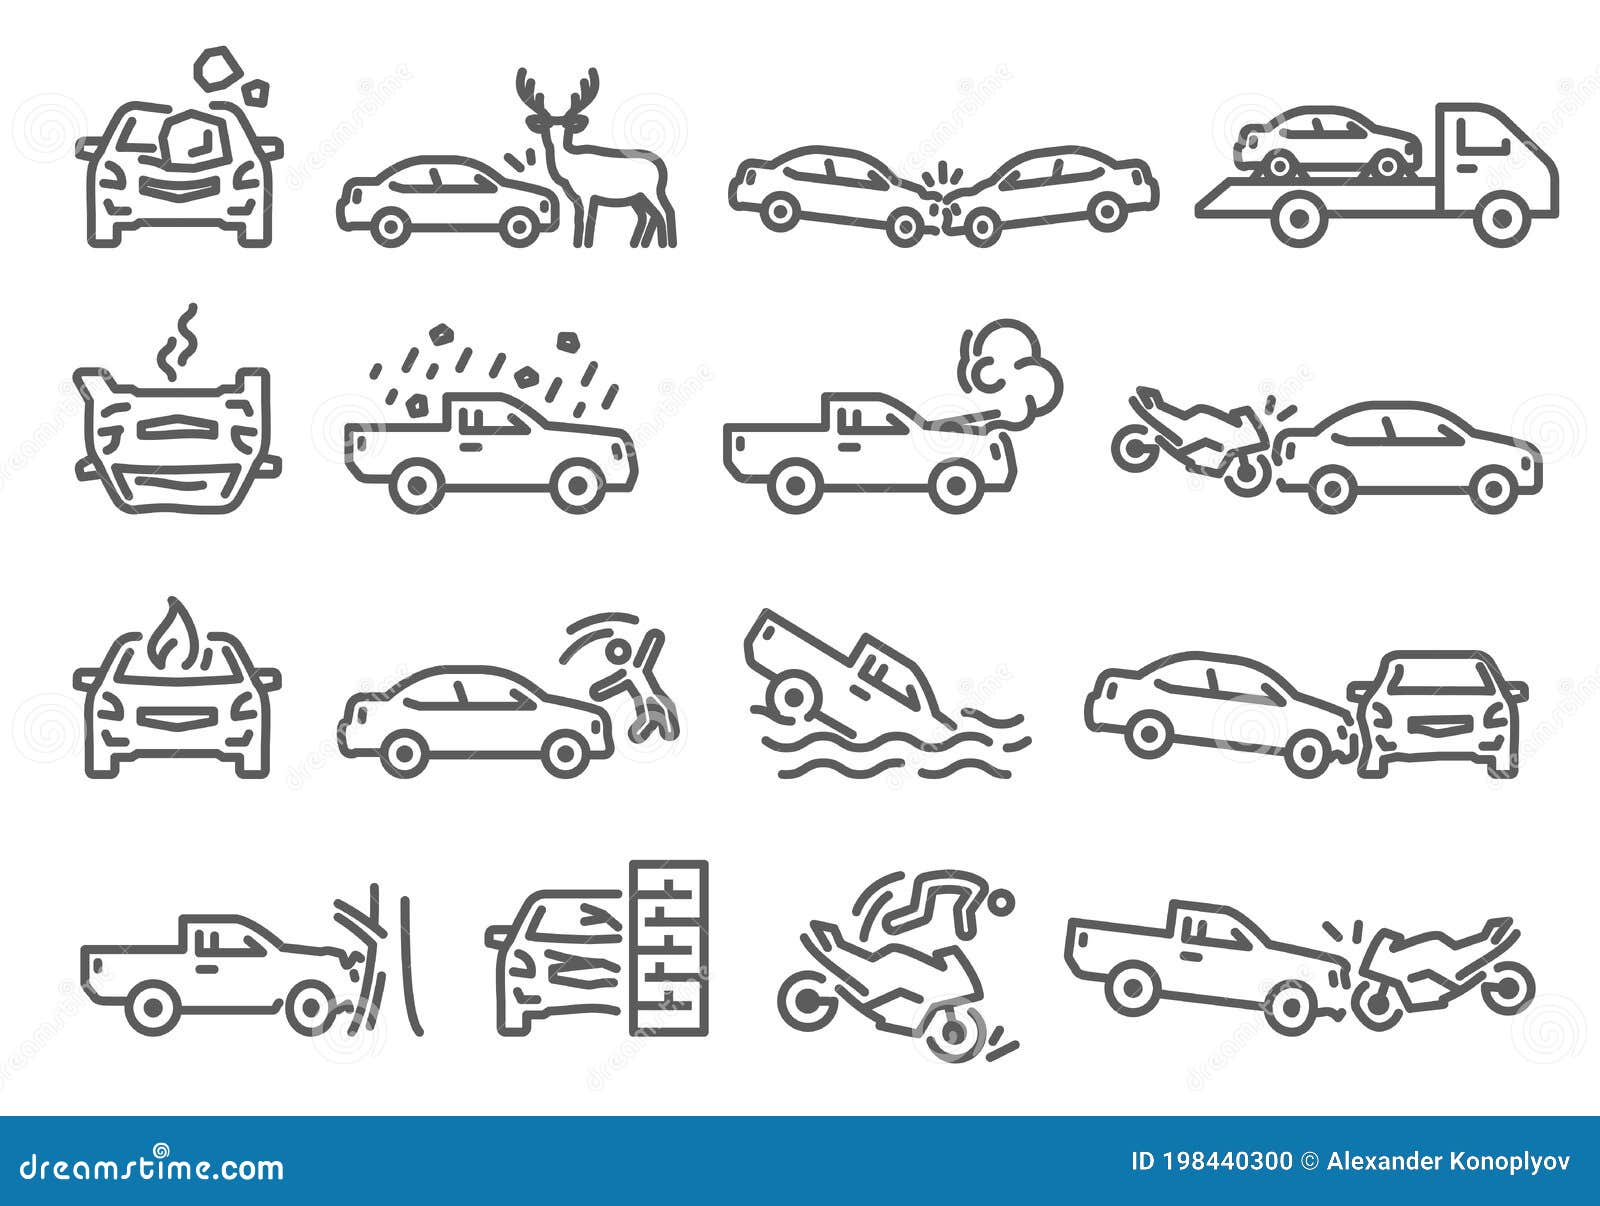 Car, Bike, Vehicle Accident Outline Icons Set Isolated on White. Crash into  Tree, Wall, Animal on Road. Stock Vector - Illustration of icon, design:  198440300